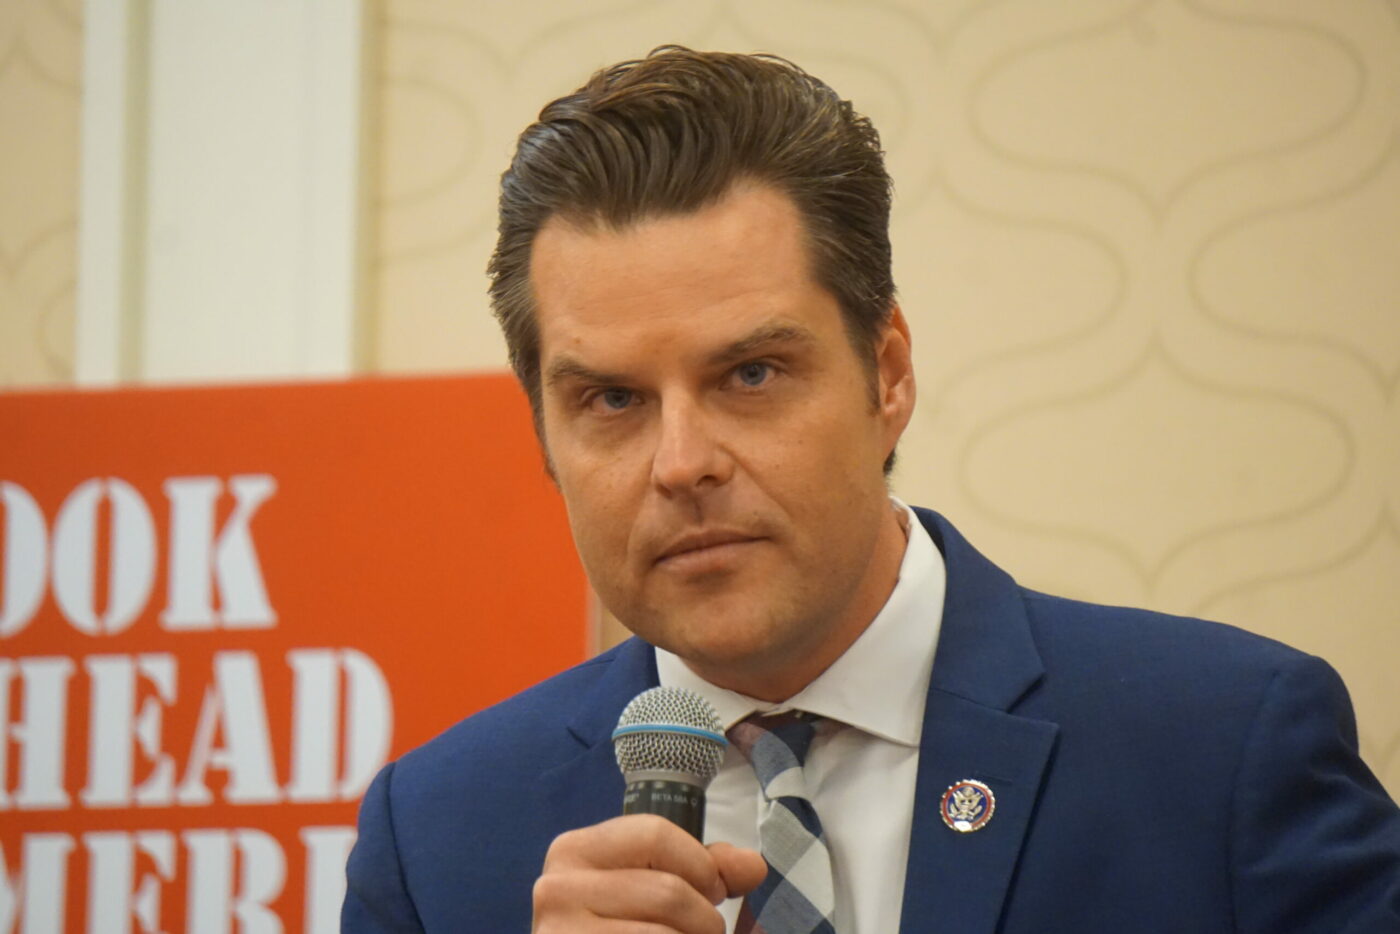 Gaetz to File 'National Stand Your Ground' Legislative Measure